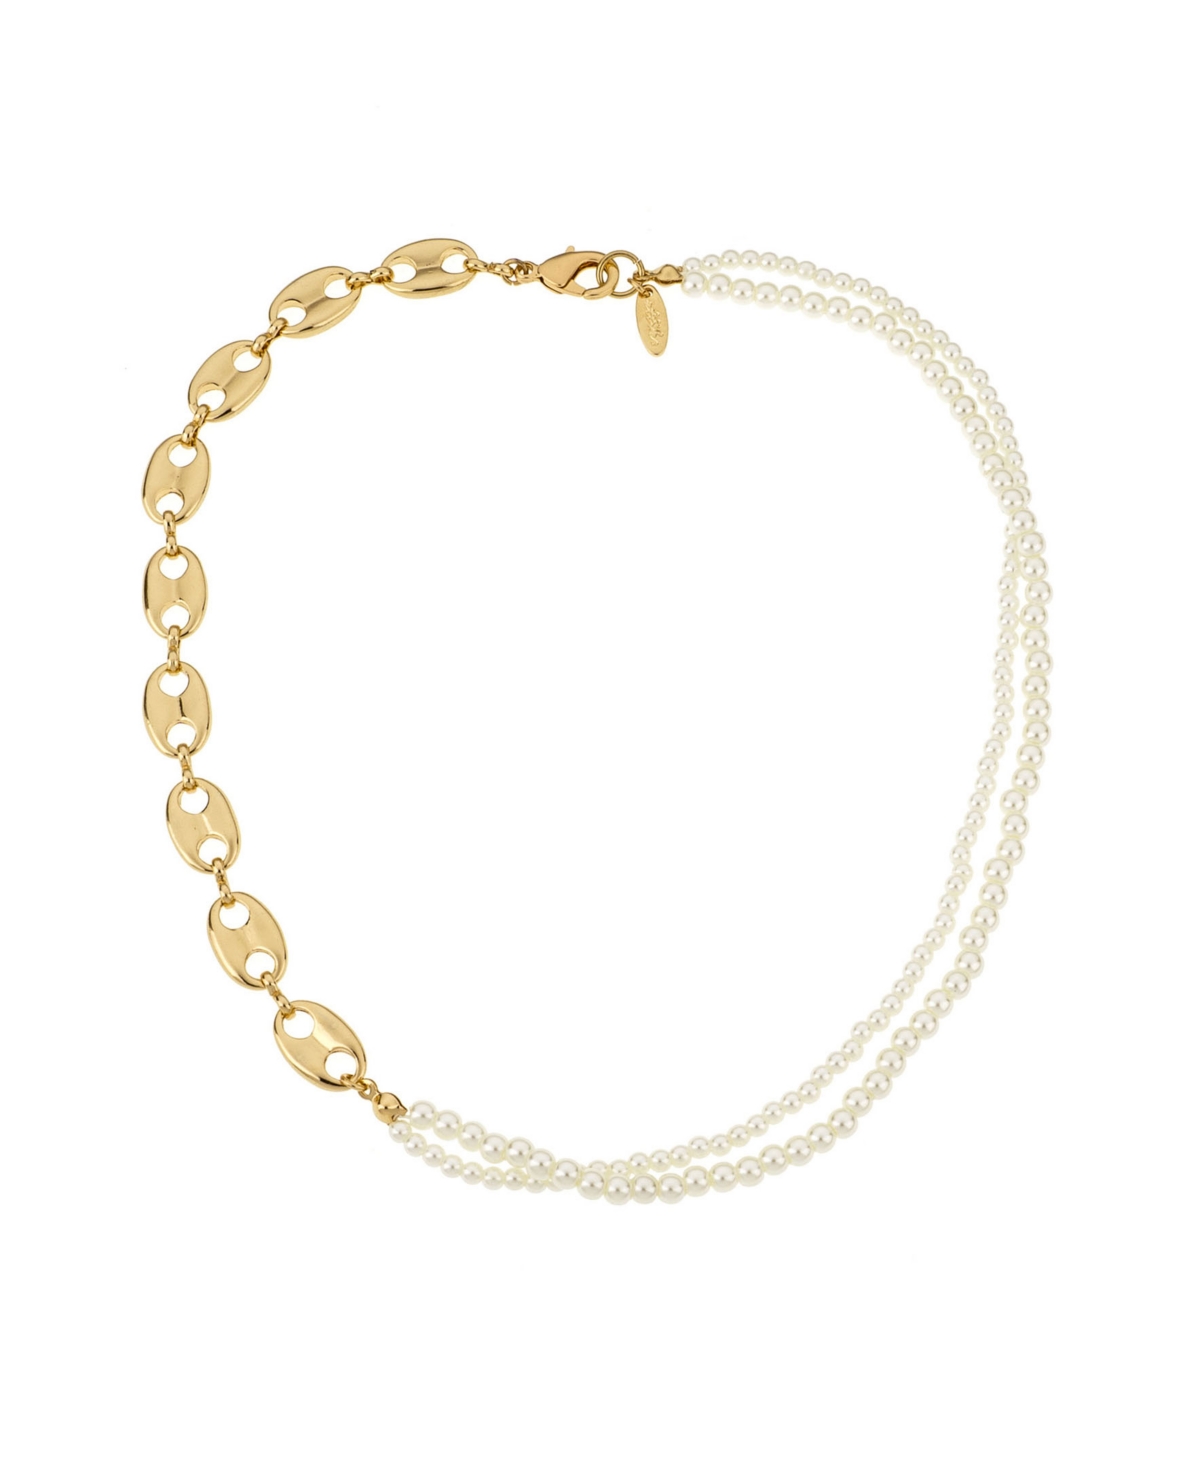 18K Gold Plated Link Chain and Cultured Freshwater Pearl Beaded Necklace - Gold-Tone